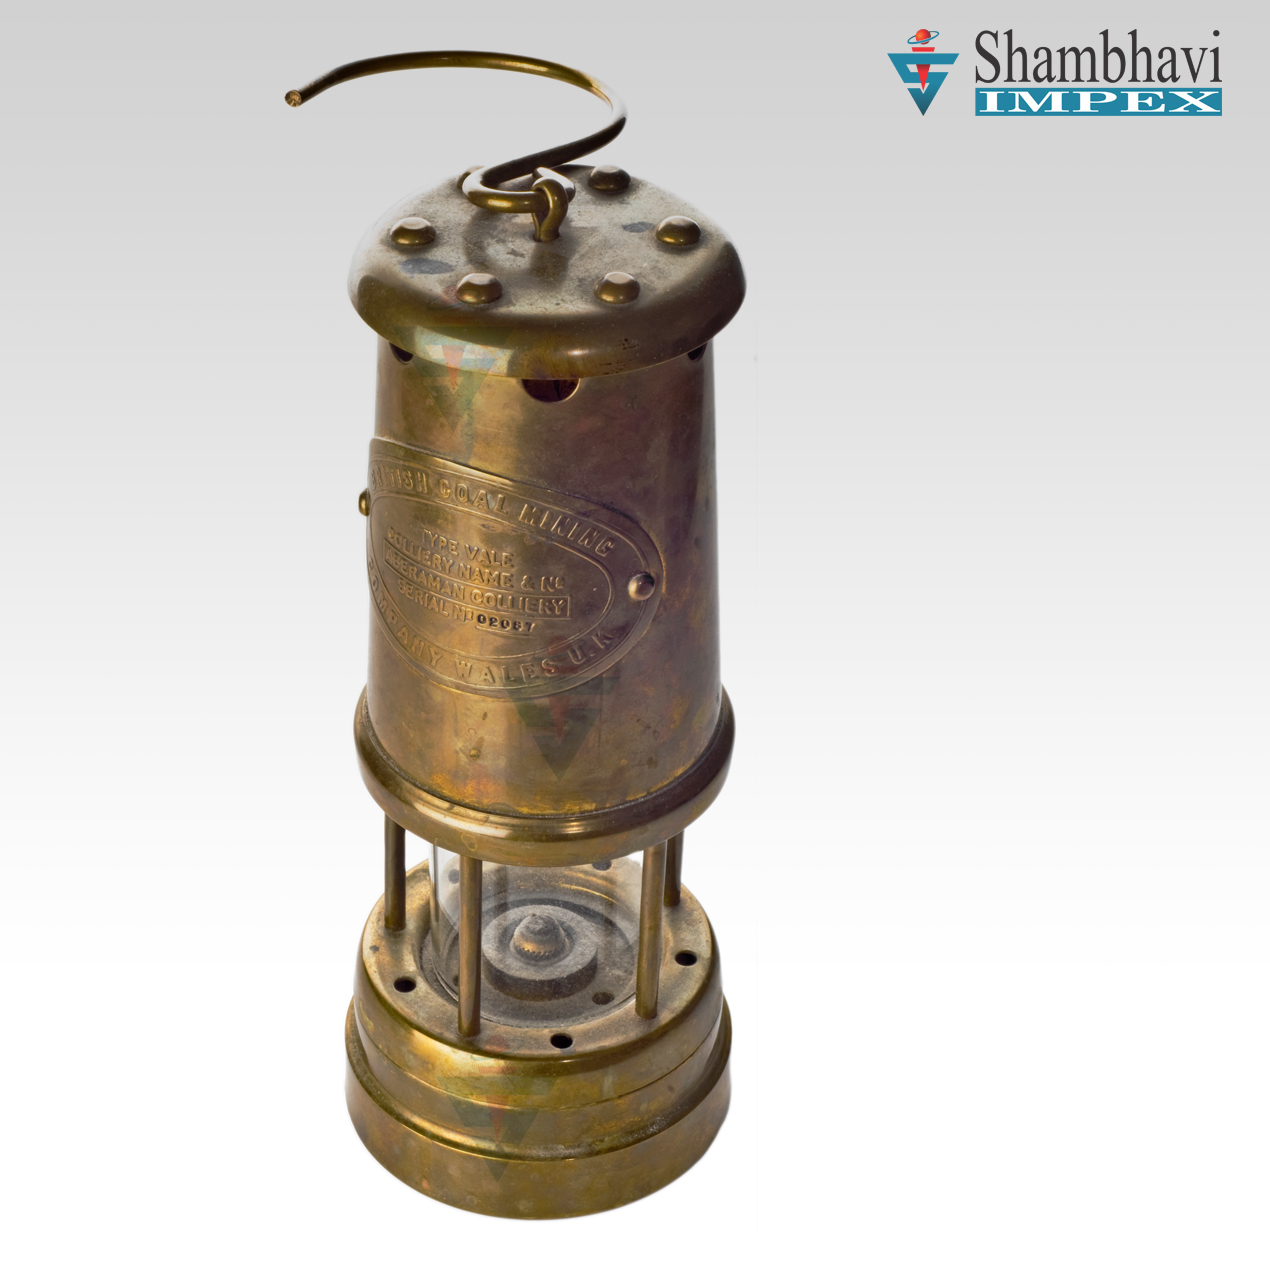 Davy s Safety Lamp